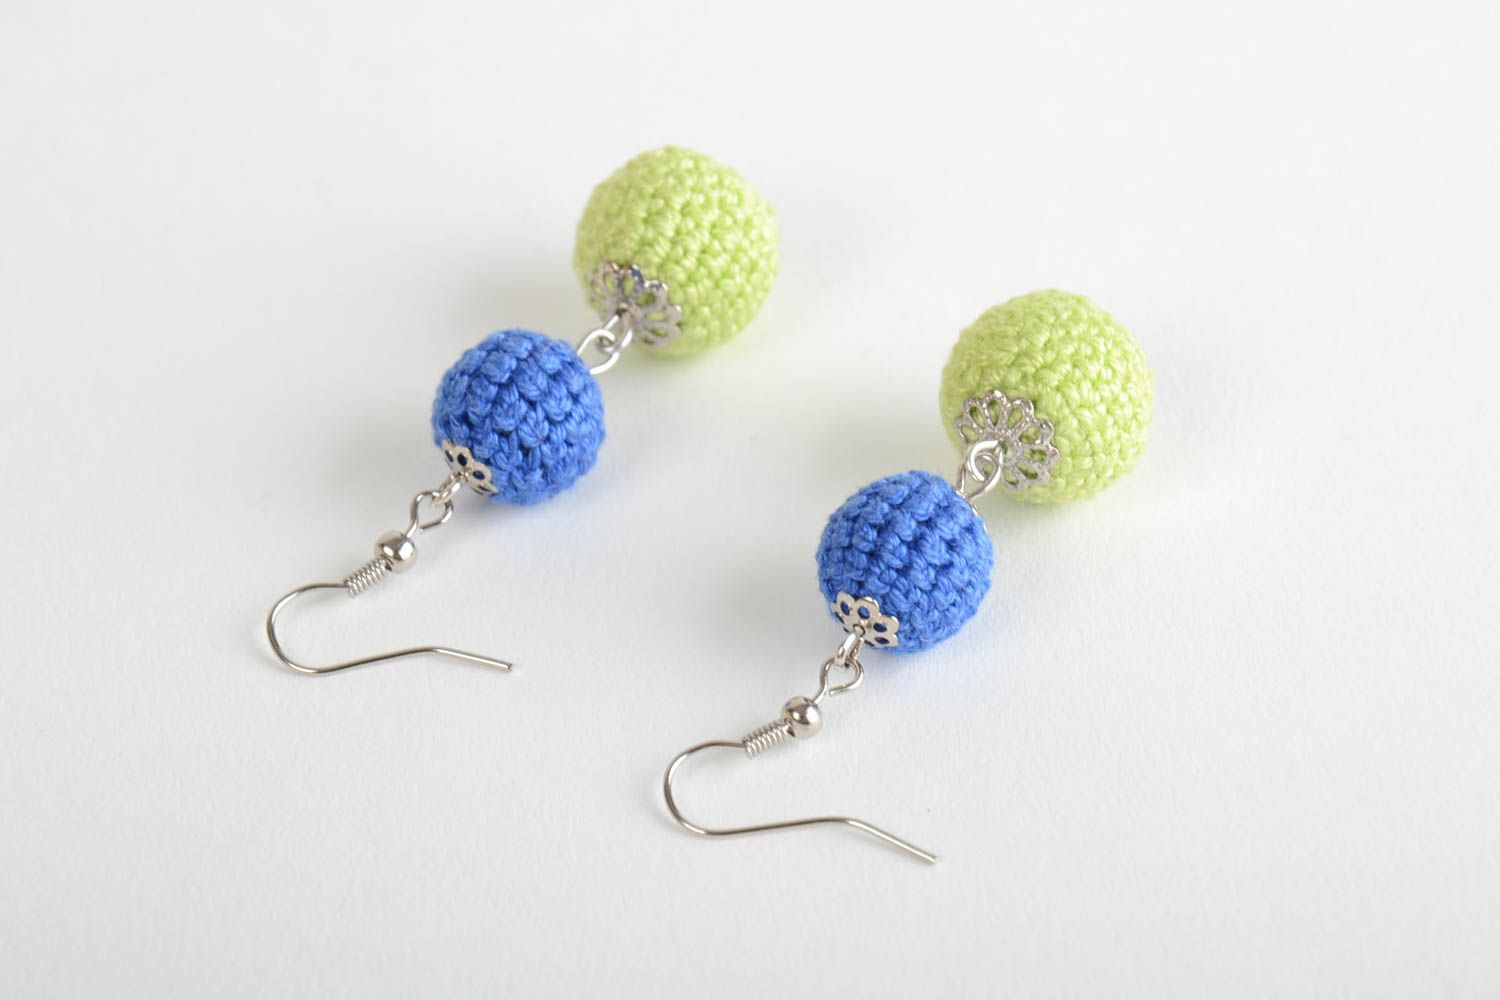 Handmade earrings with beads crocheted over with yellow and blue threads photo 3